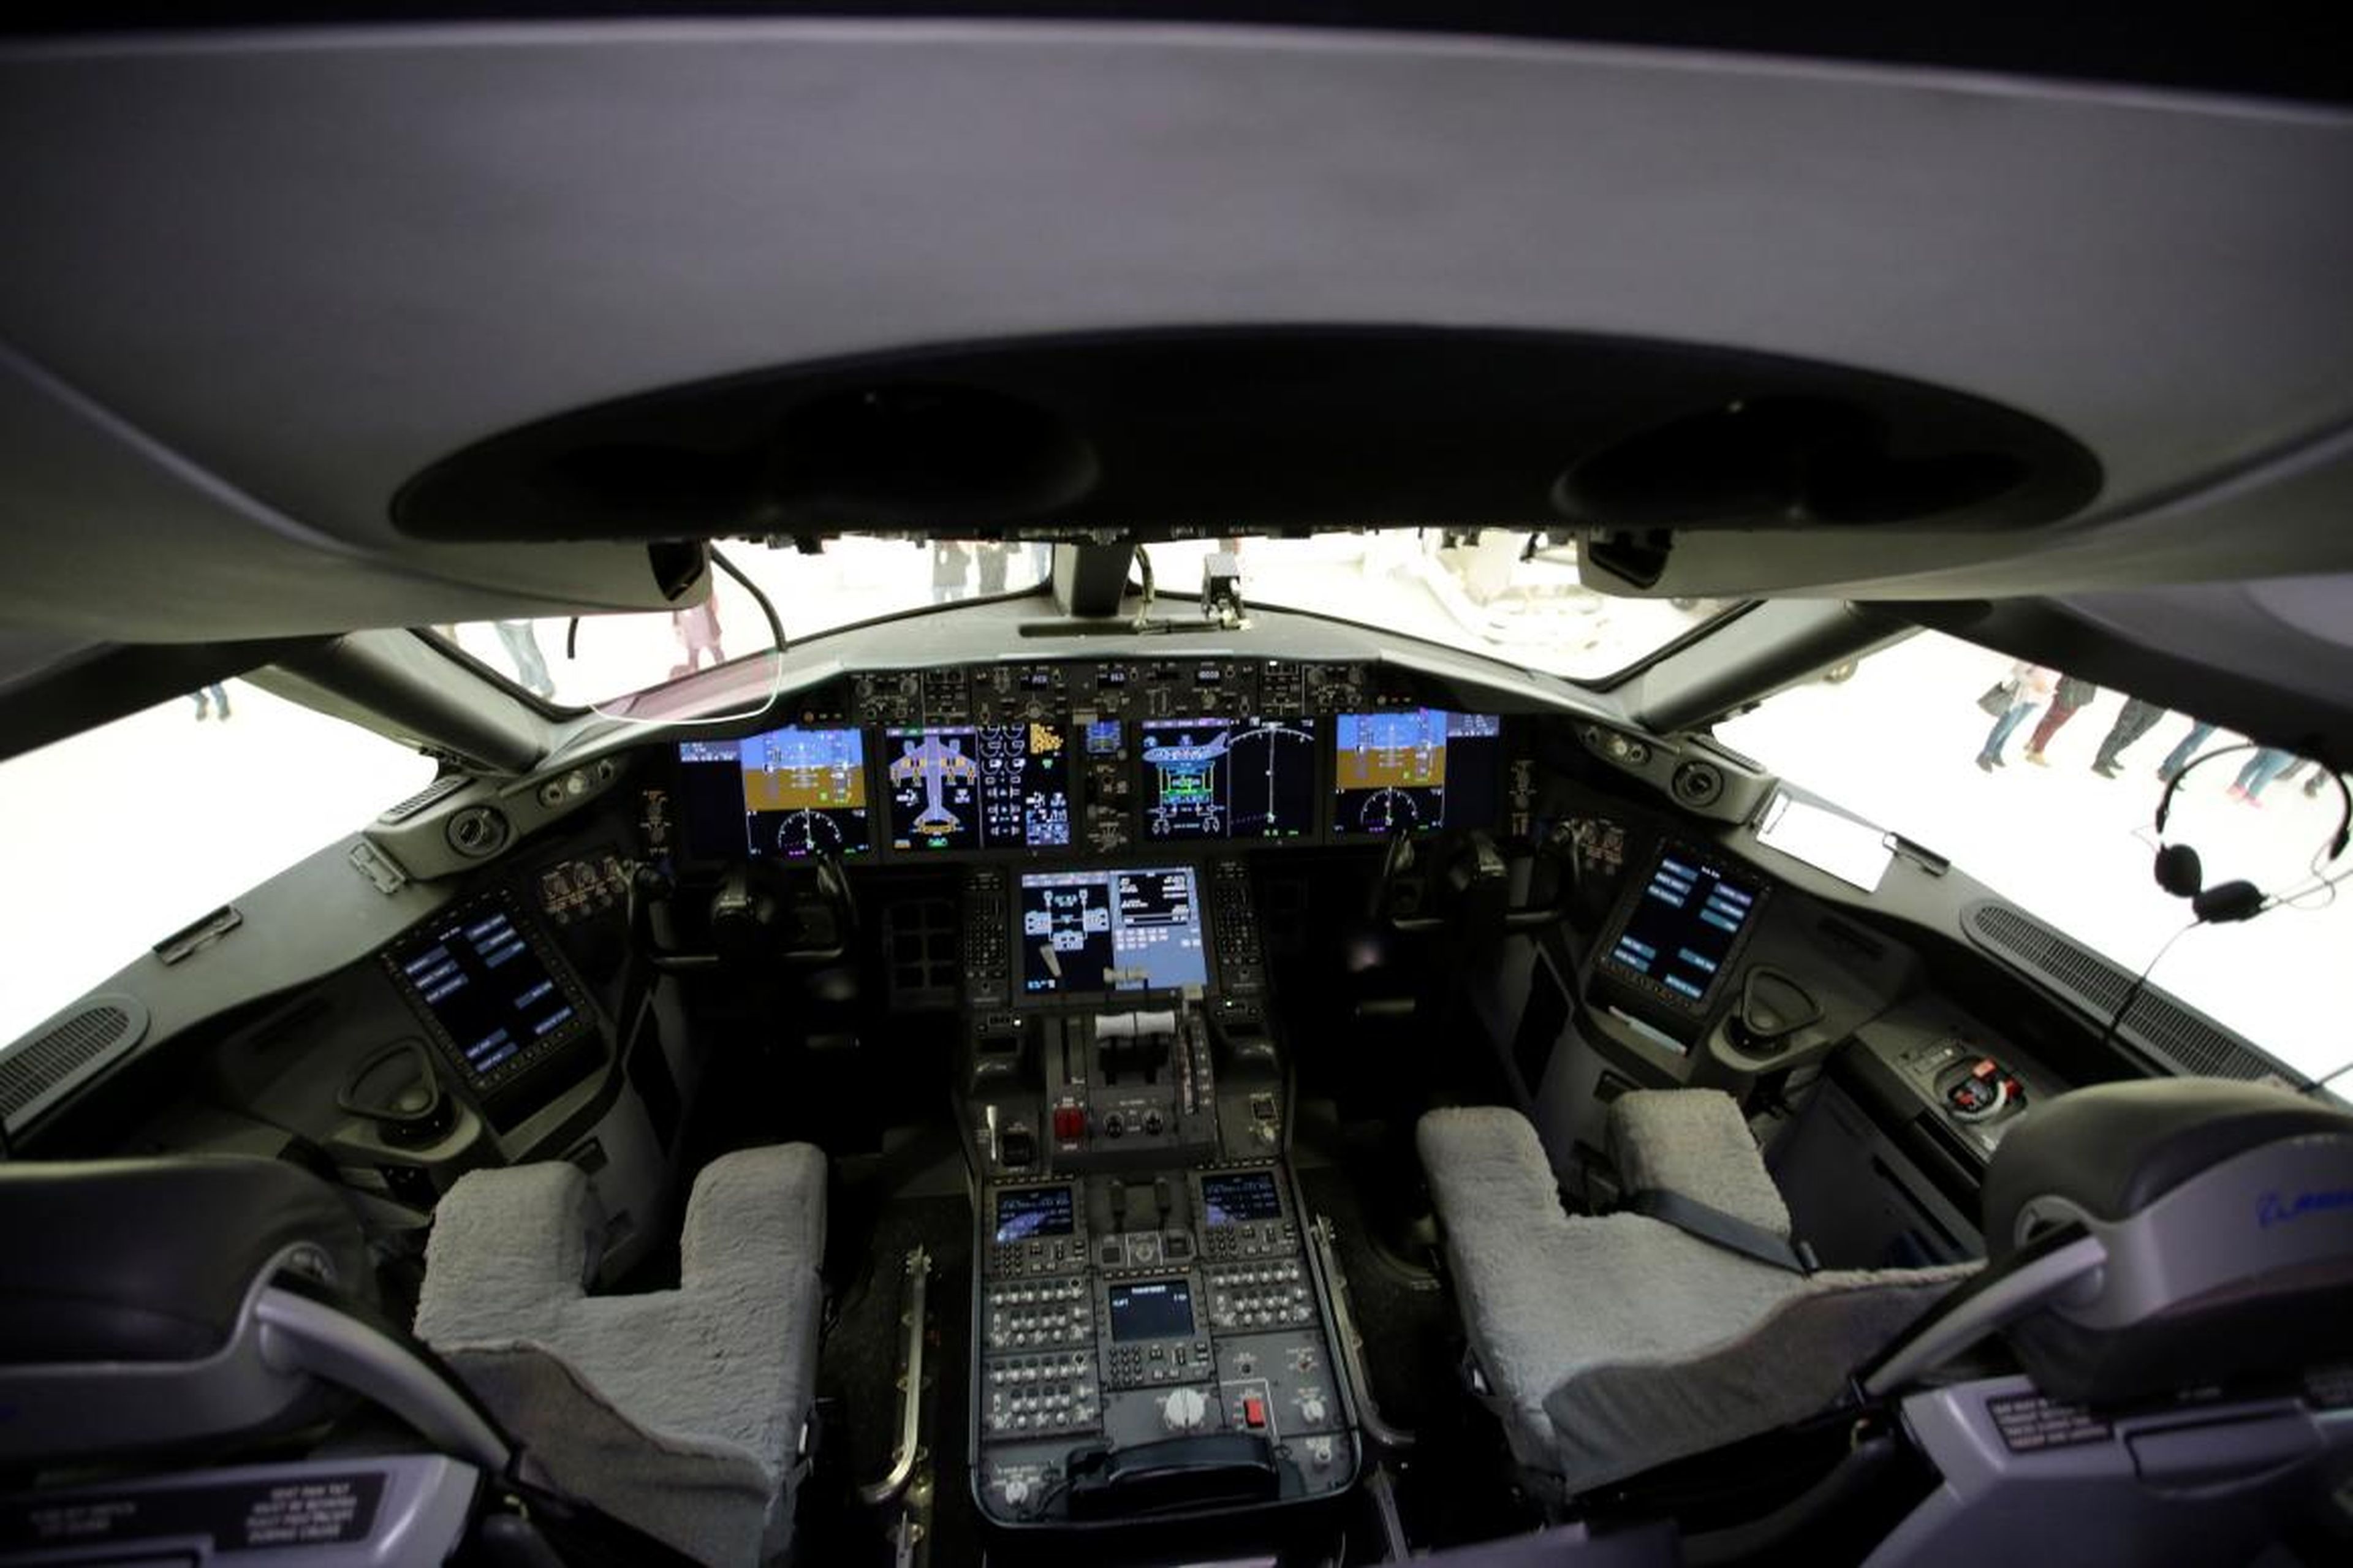 Here's a look inside the Dreamliner's state-of-the-art digital cockpit.